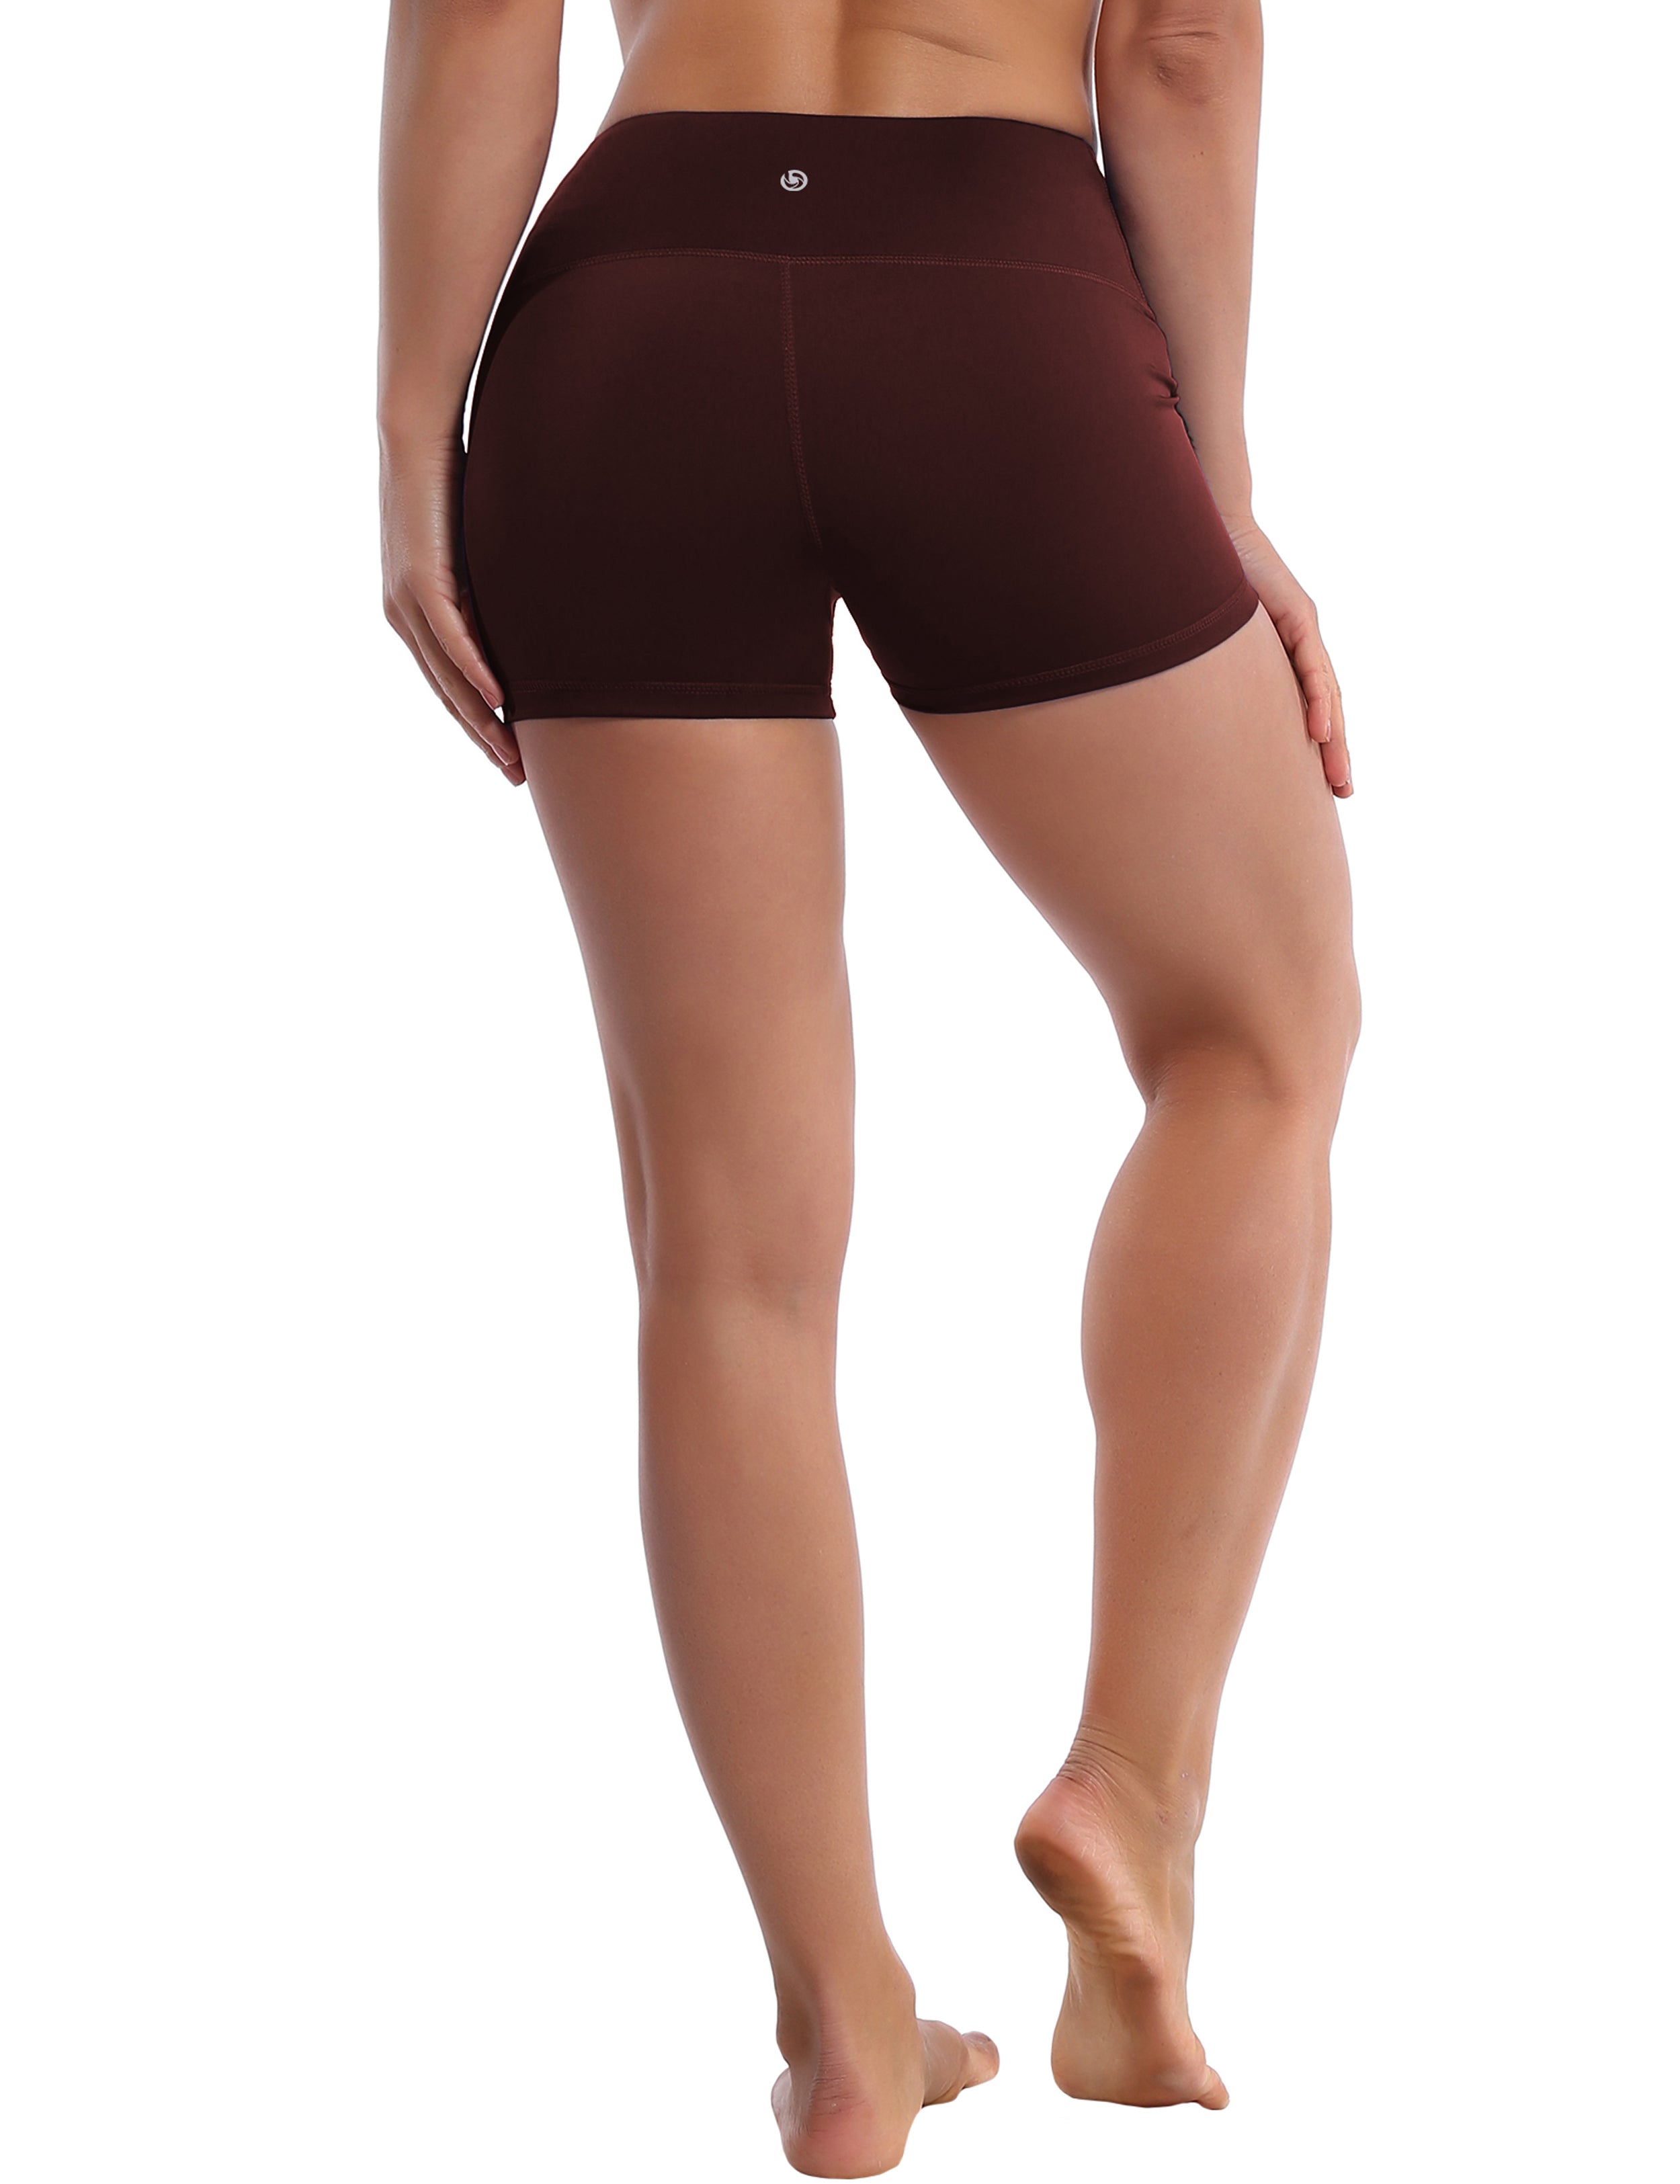 2.5" Pilates Shorts mahoganymaroon Softest-ever fabric High elasticity High density 4-way stretch Fabric doesn't attract lint easily No see-through Moisture-wicking Machine wash 75% Nylon, 25% Spandex